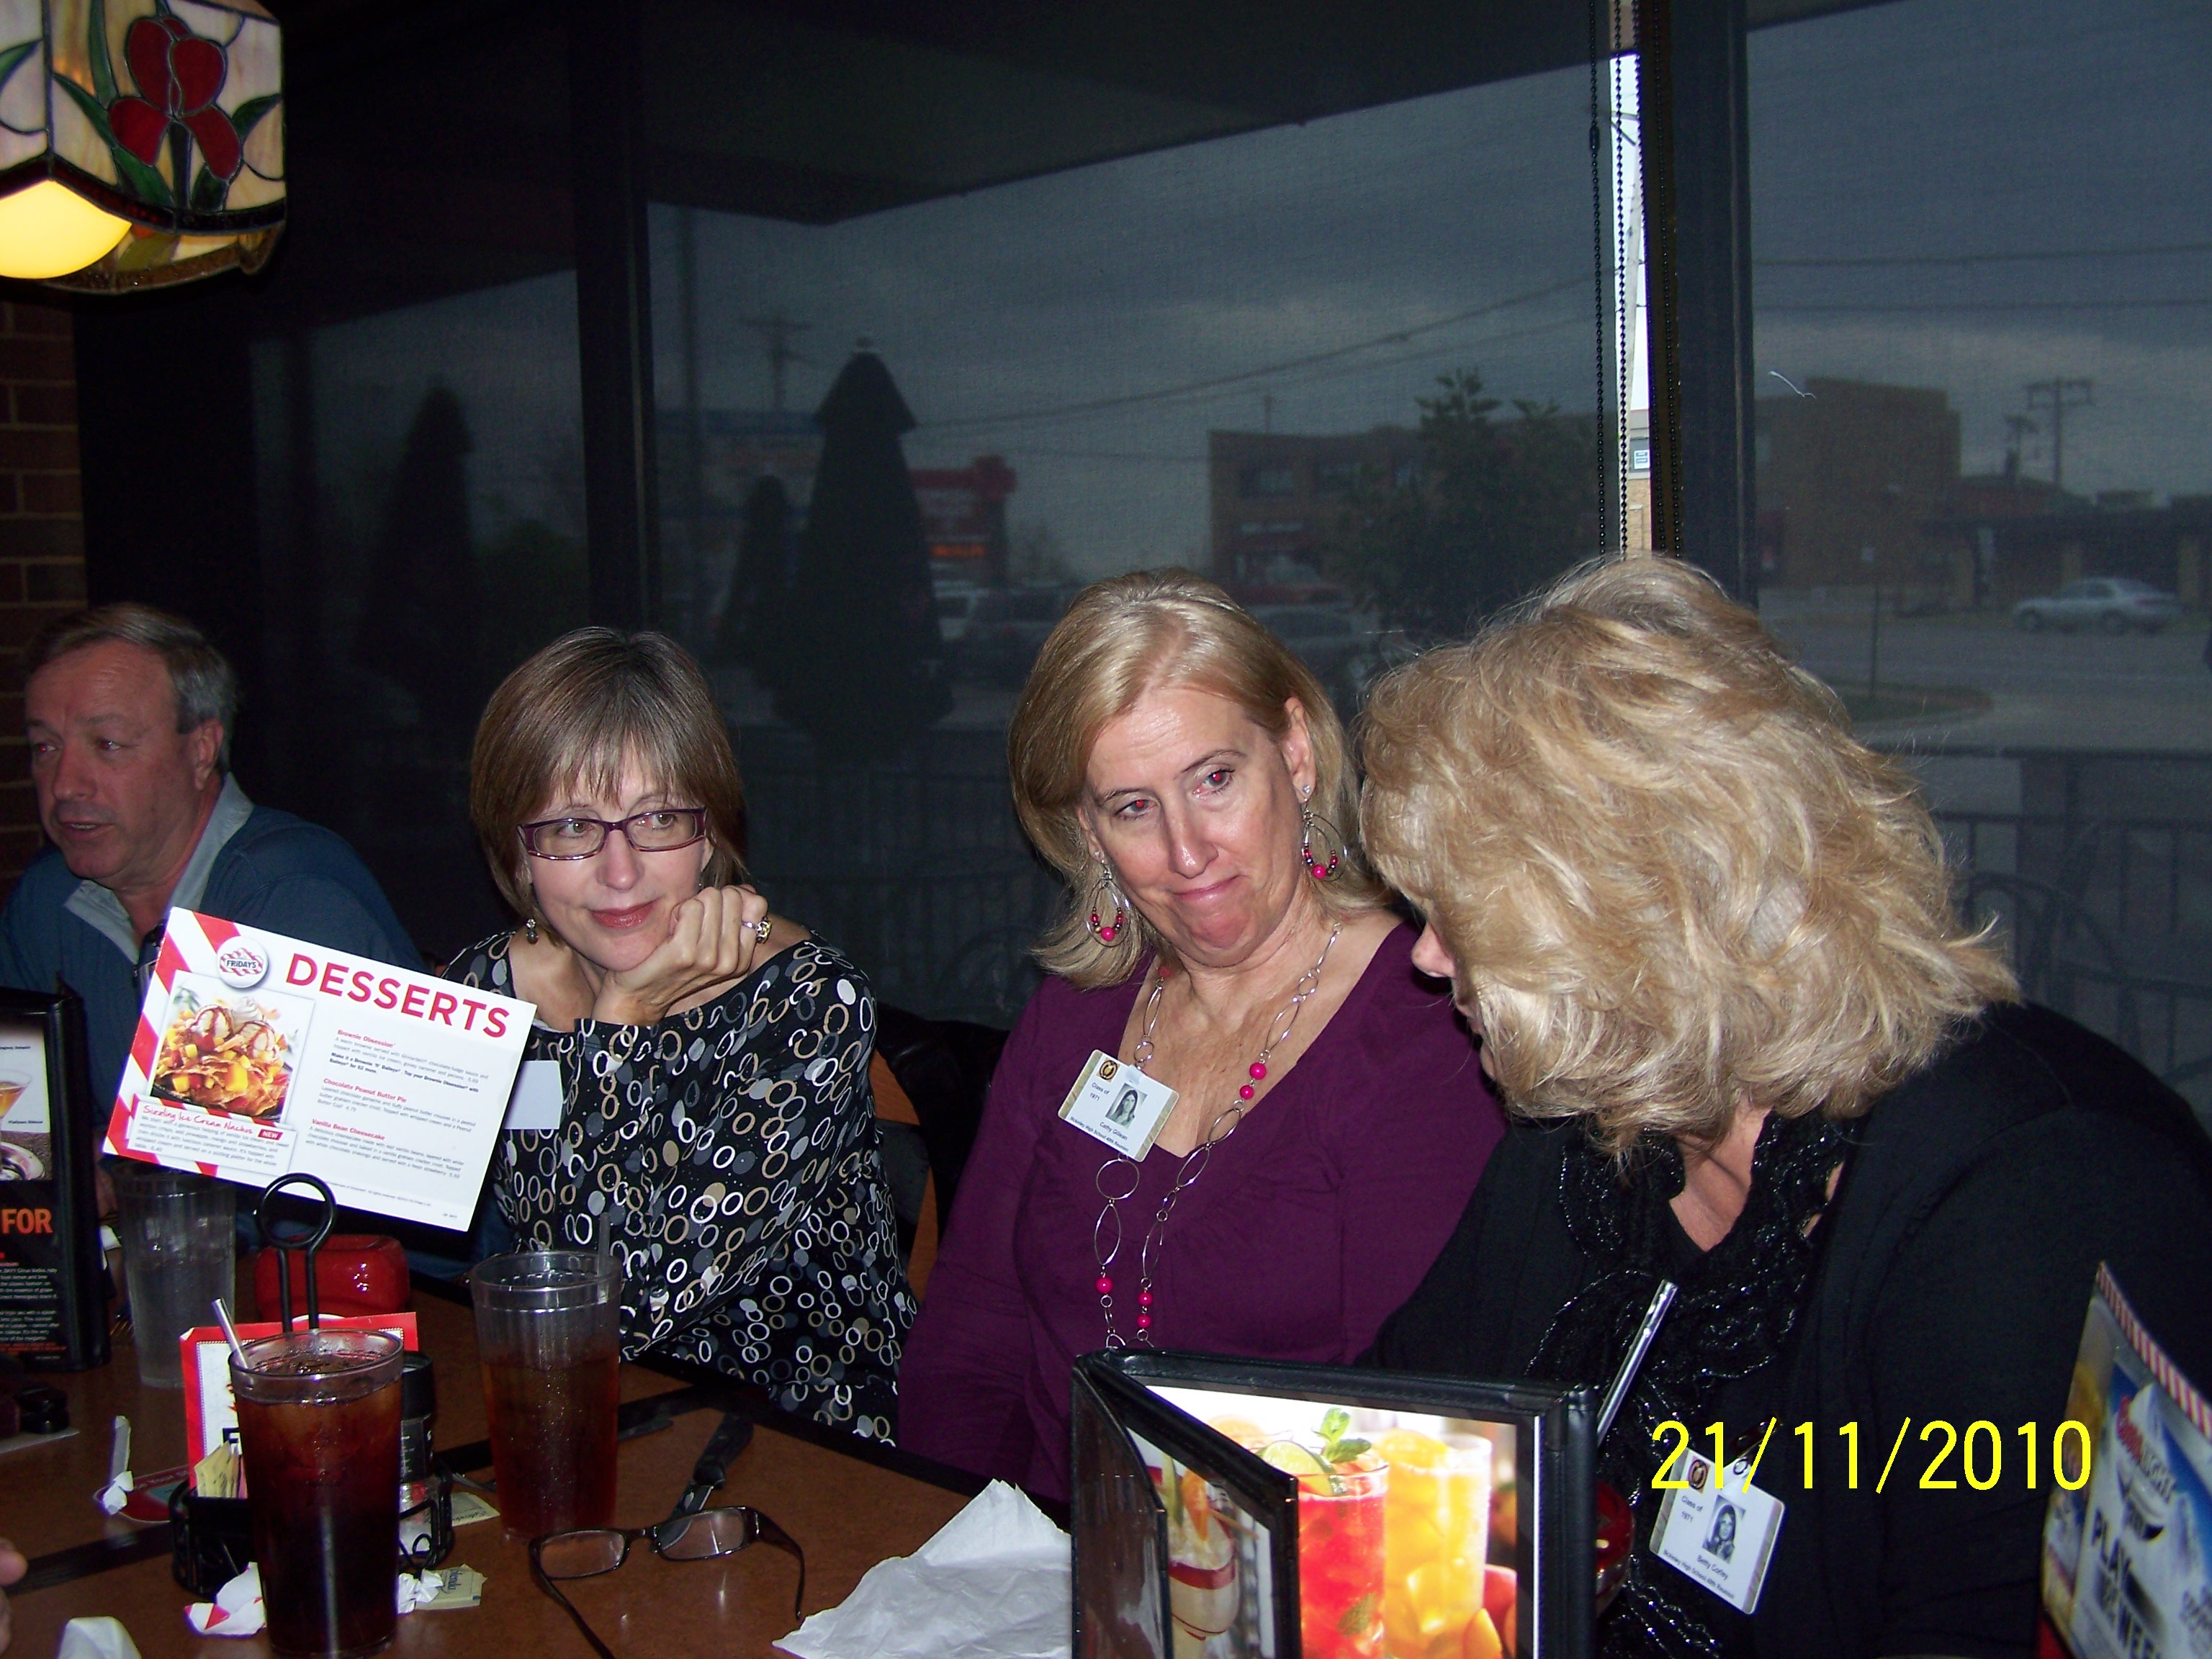 Betty Corley, Cathy Gillean, Rita Long, and Don Teasdale